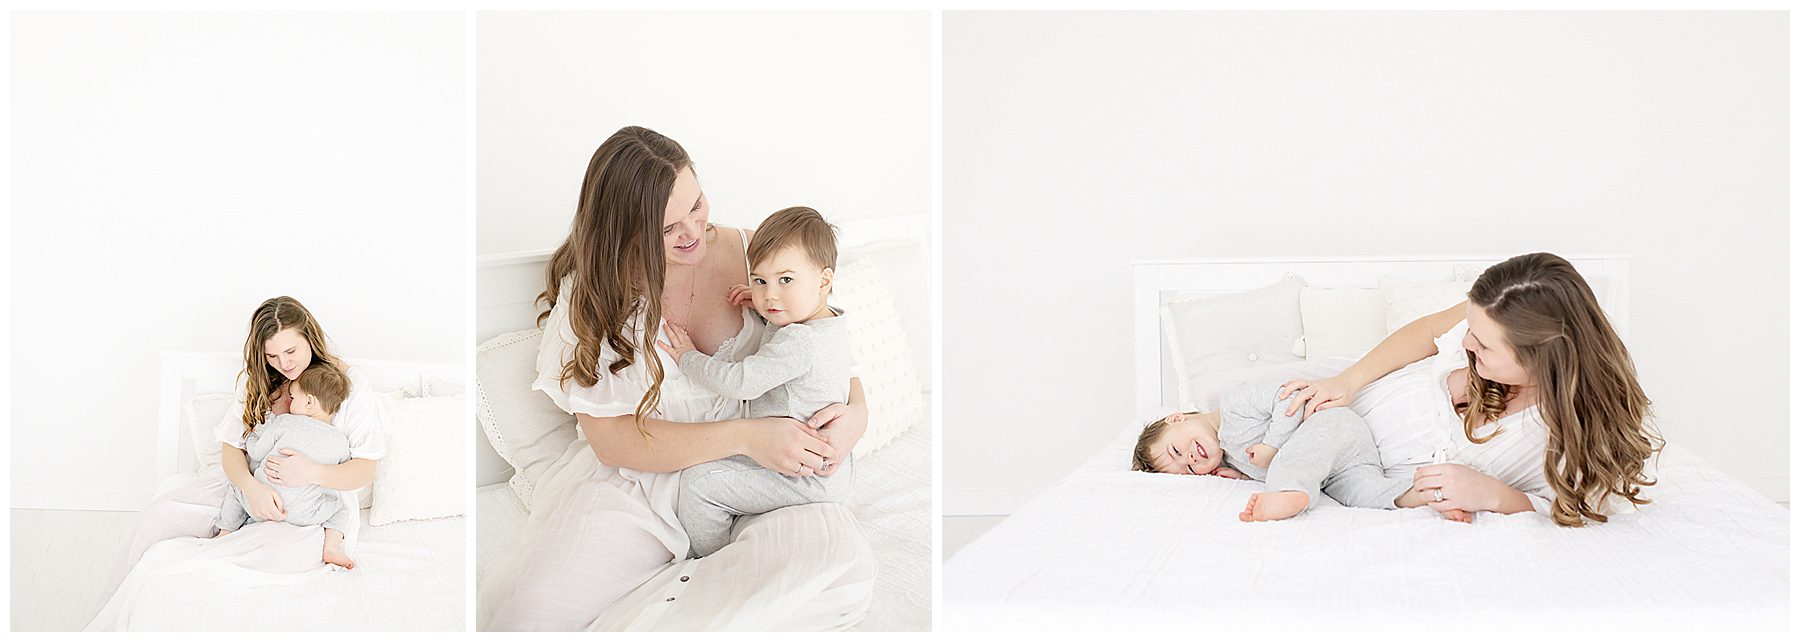 Pregnant mom with toddler baby on white bed.